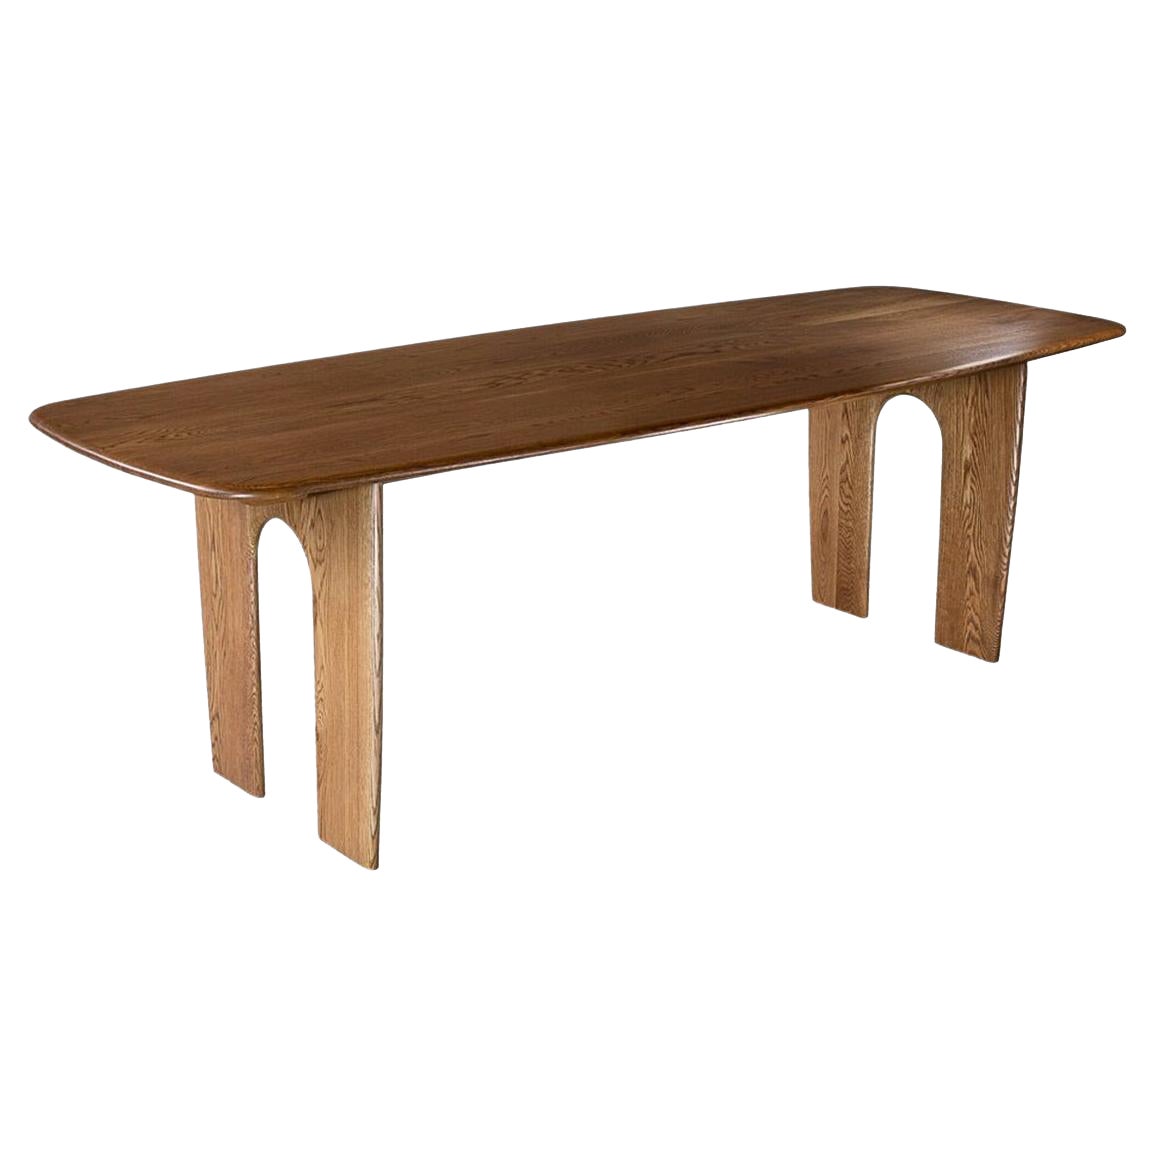 Coble Dining Table - Wooden Oak Veneer - seats 4-6 For Sale